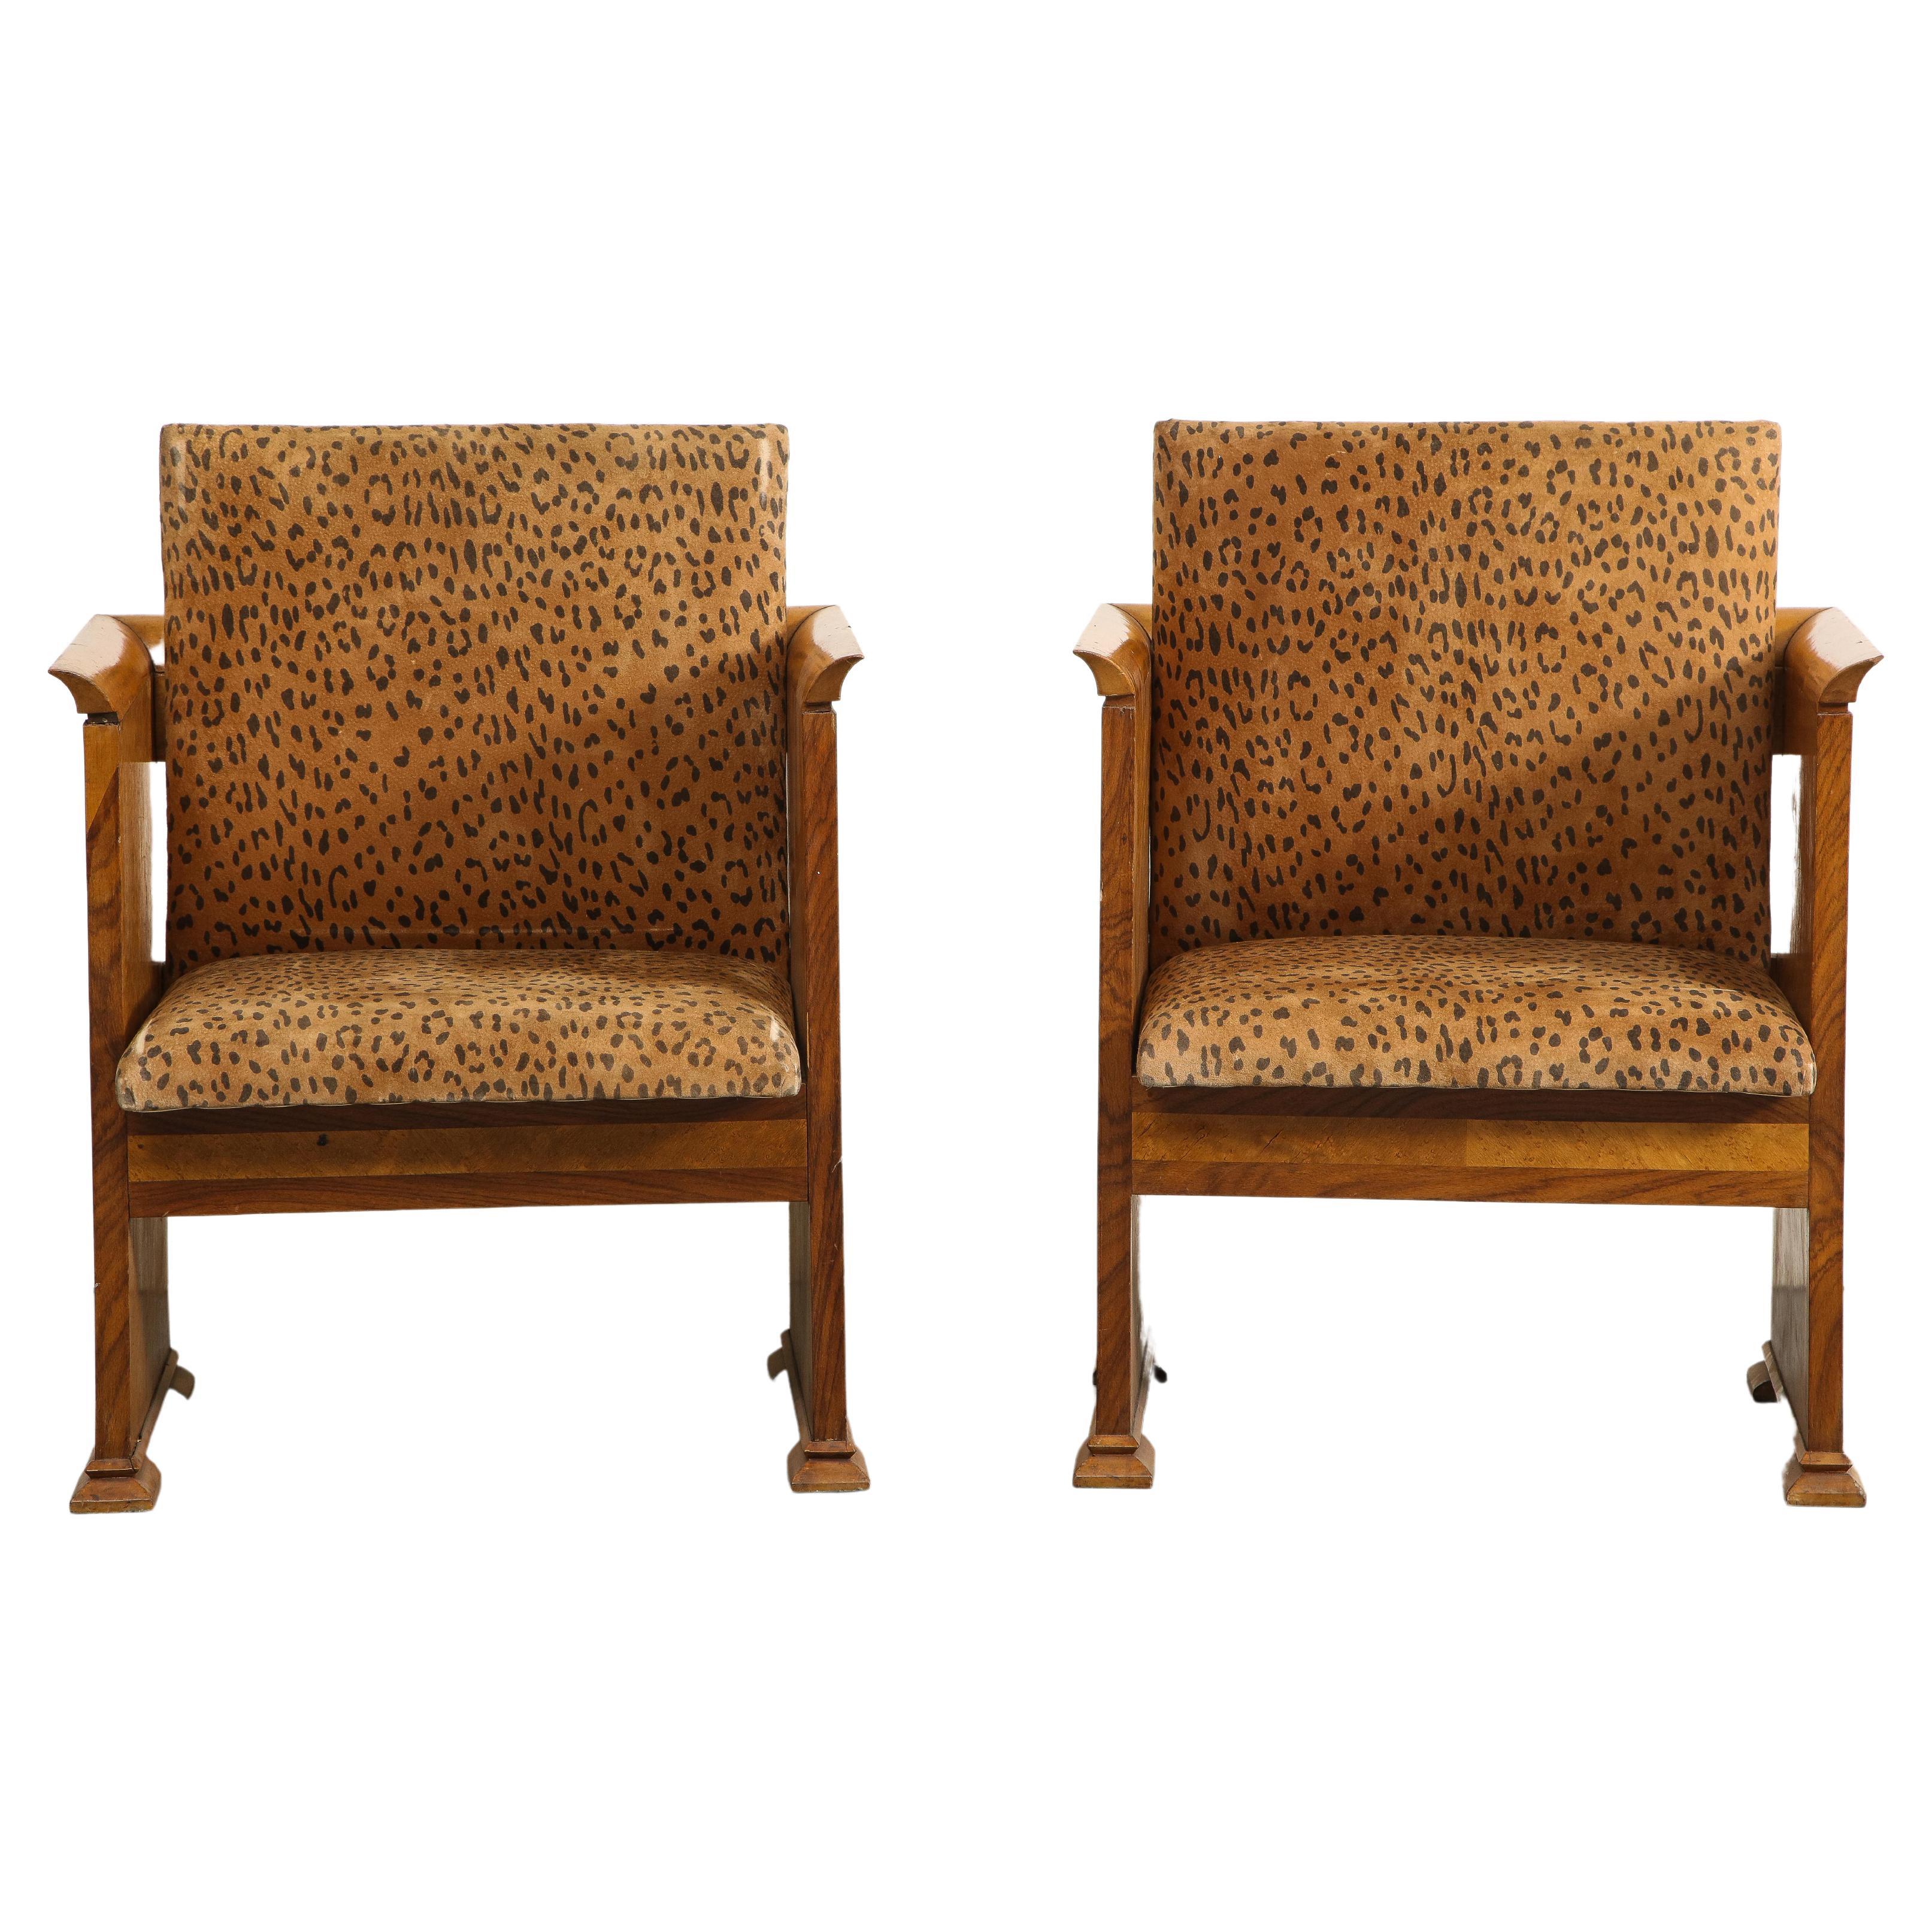 Pair of Midcentury Italian Walnut Armchairs with Leopard Cushions, 1930s 